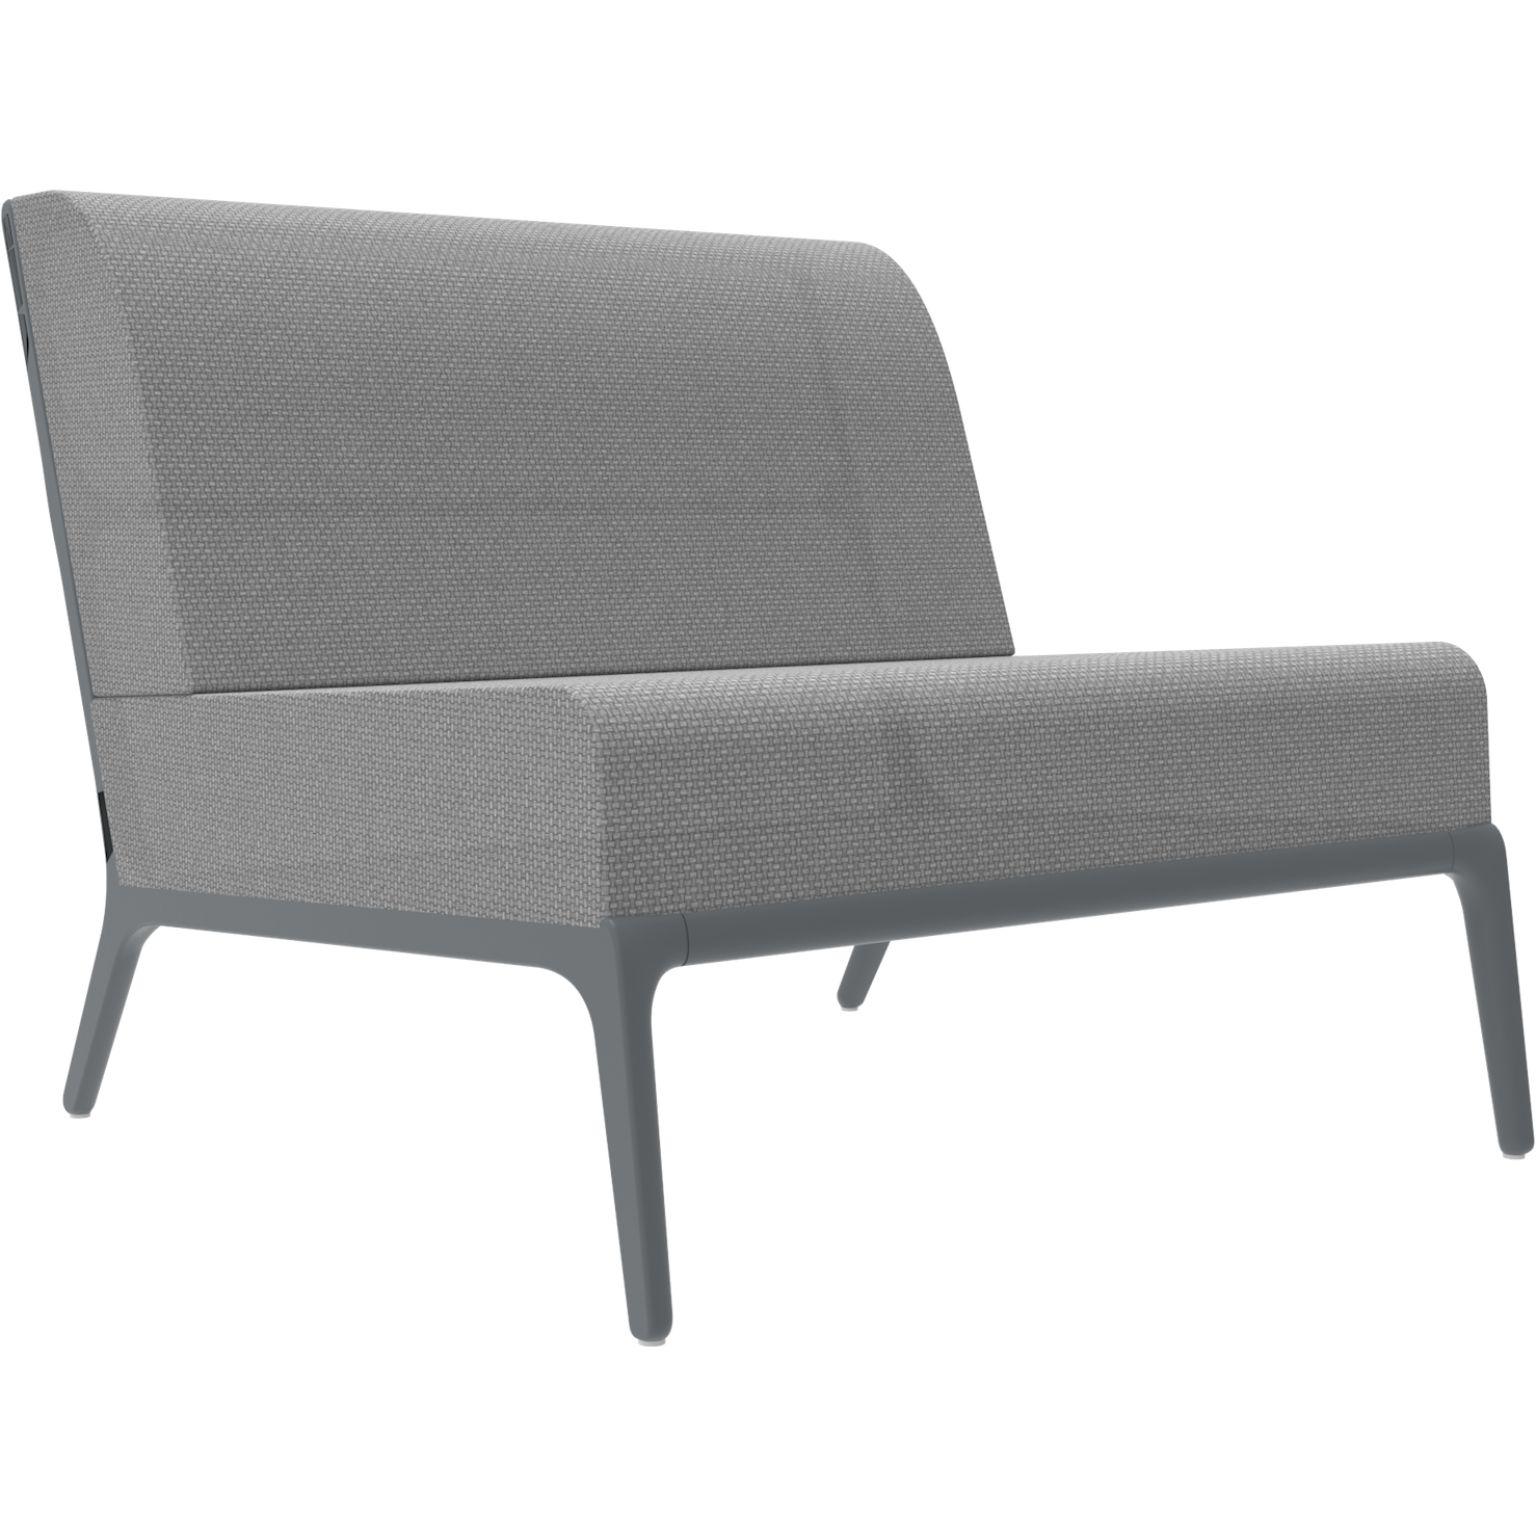 Xaloc Central 90 grey modular sofa by MOWEE
Dimensions: D100 x W90 x H81 cm (Seat Height 42cm)
Material: Aluminum, Textile
Weight: 24 kg
Also Available in different colors and finishes. 

 Xaloc synthesizes the lines of interior furniture to